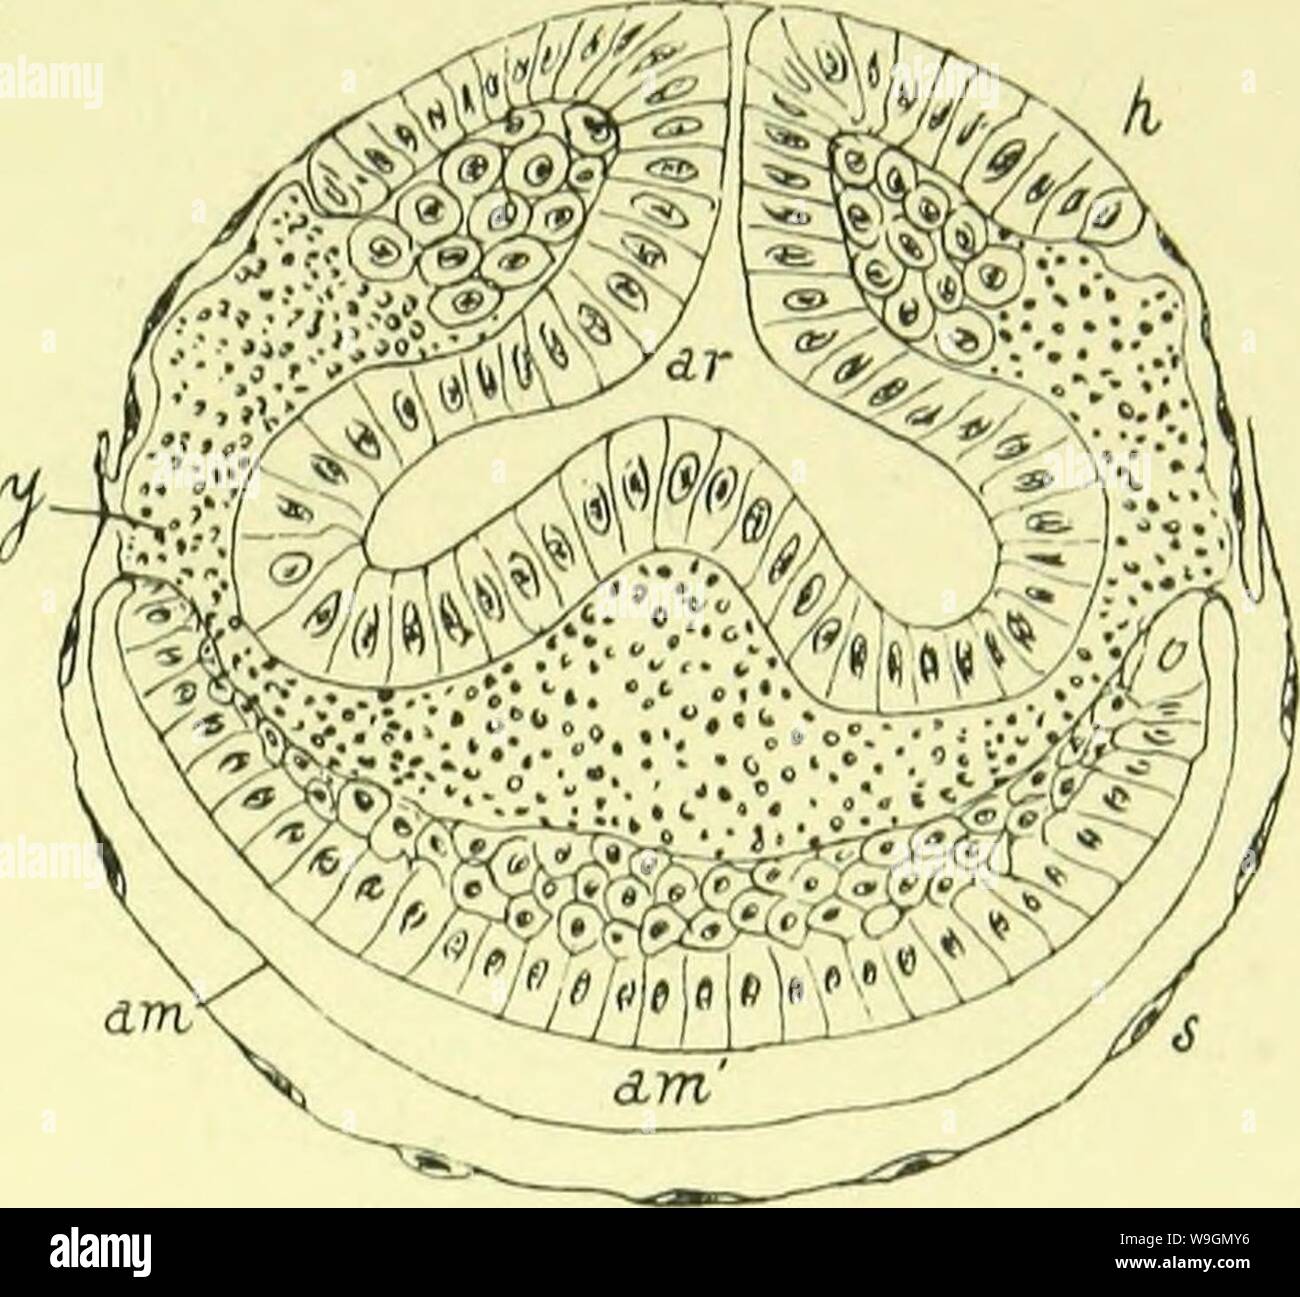 Archive image from page 292 of The anatomy, physiology, morphology and Stock Photo